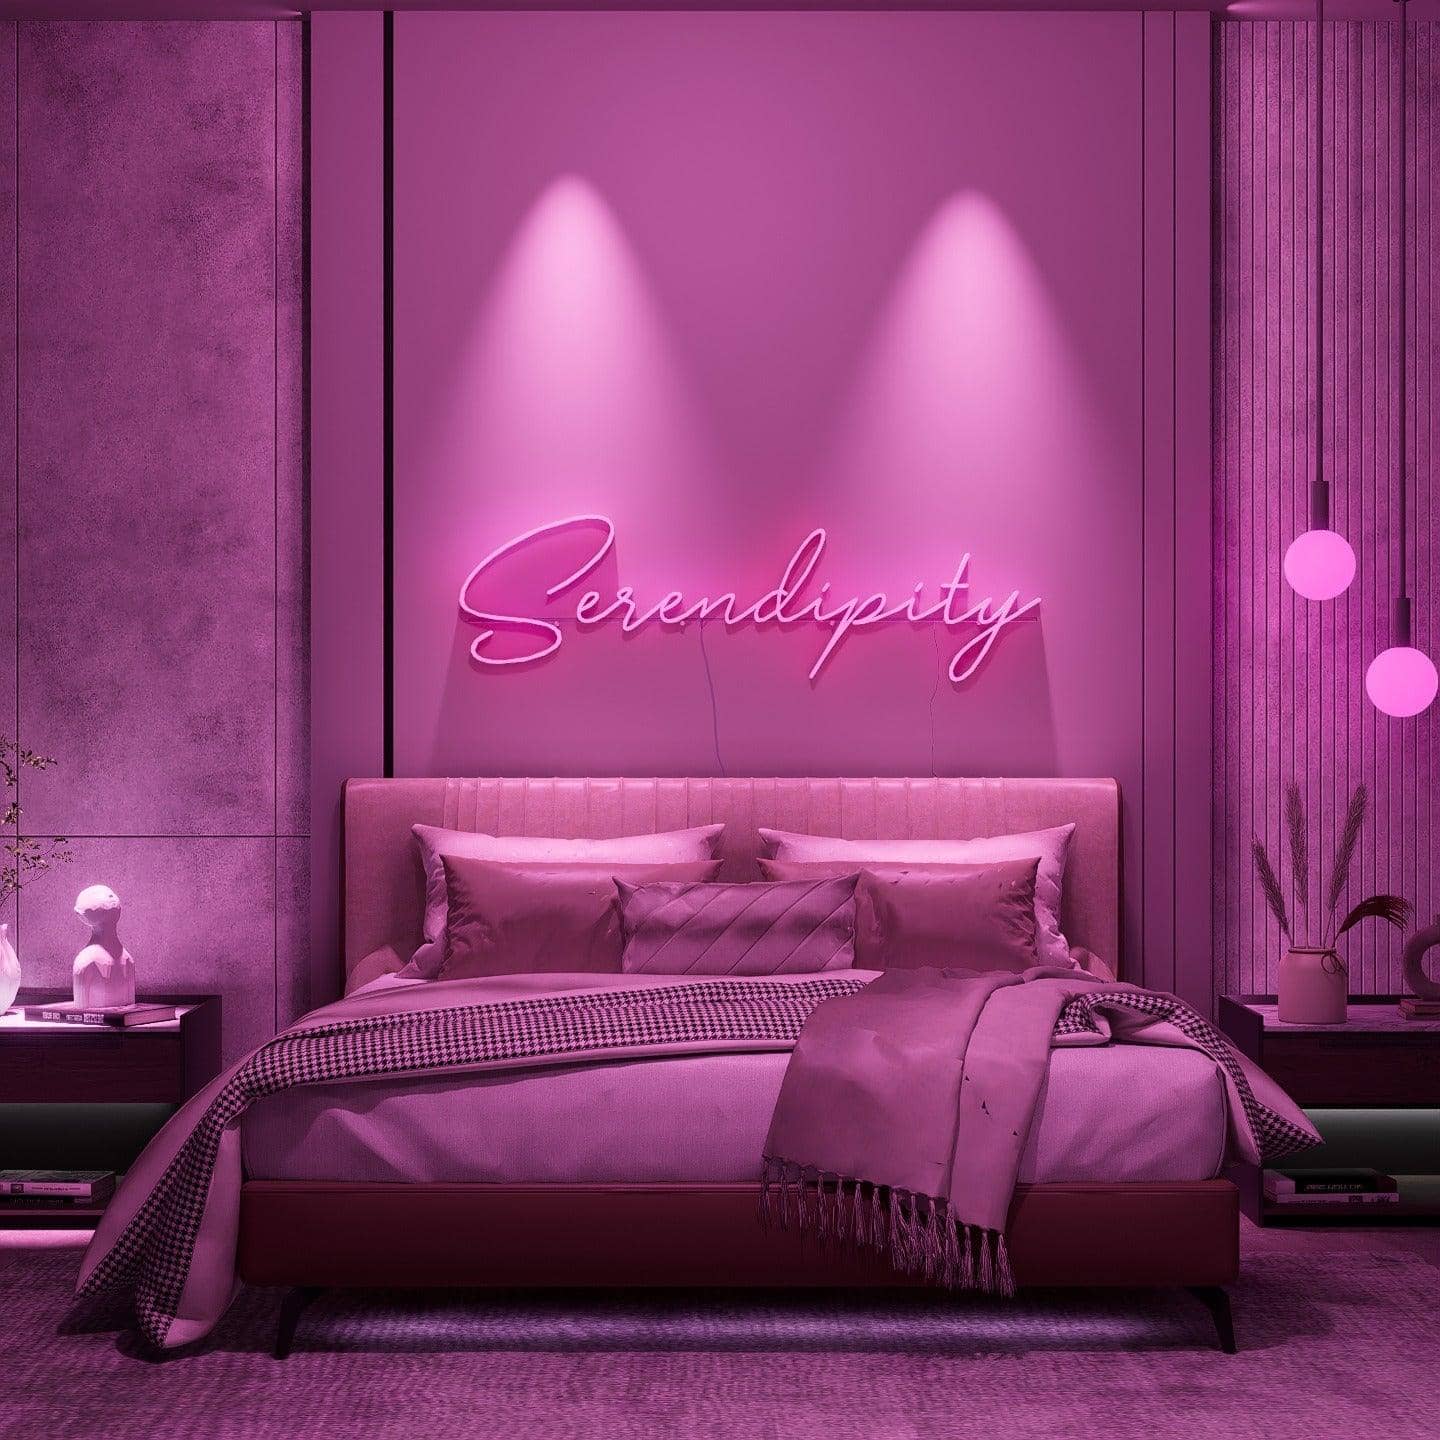 dark-night-lit-pink-neon-lights-hanging-on-the-wall-for-display-srendipity